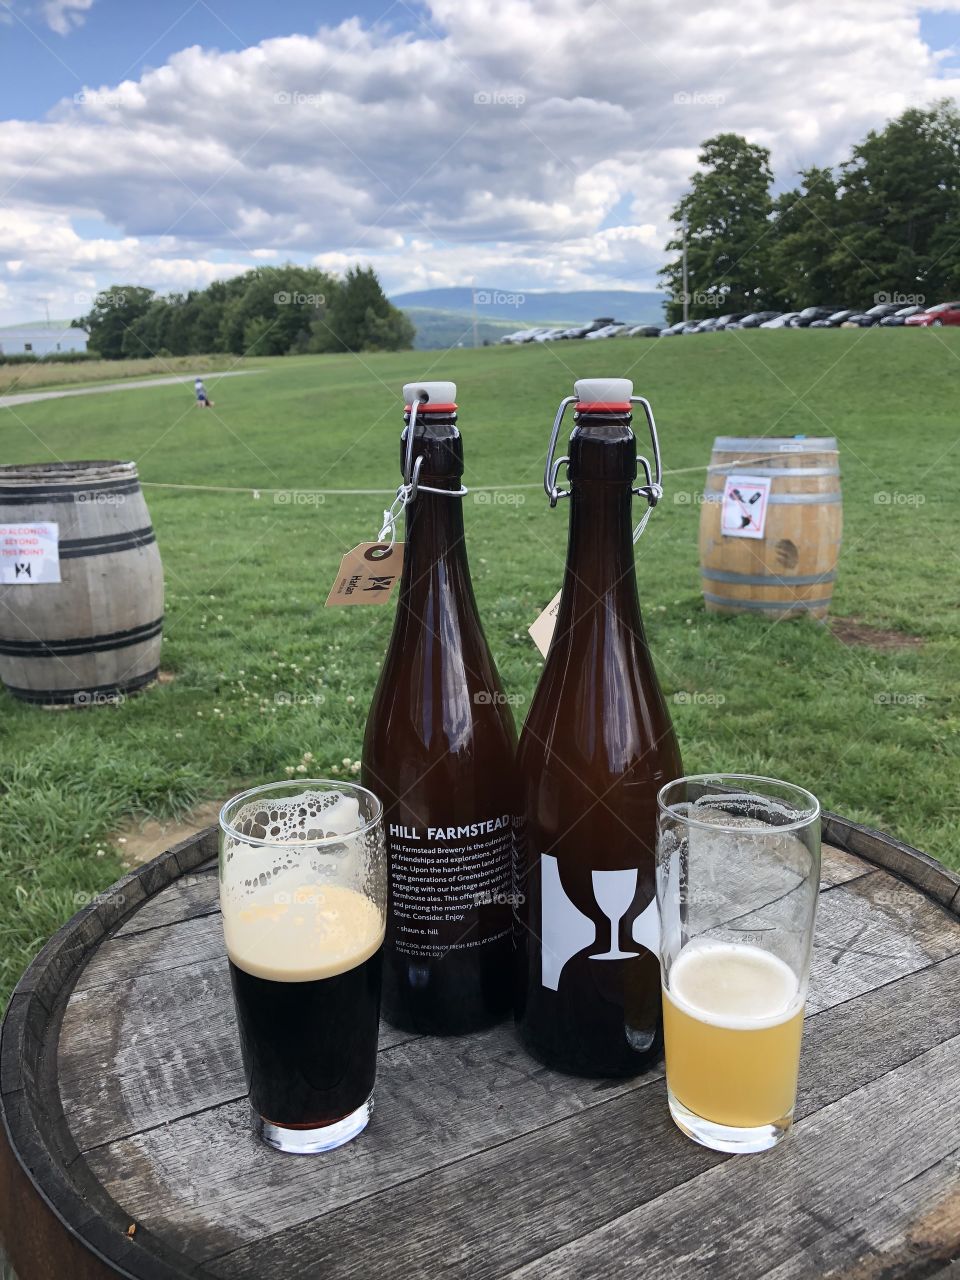 Hill Farmstead brewery, Vermont 